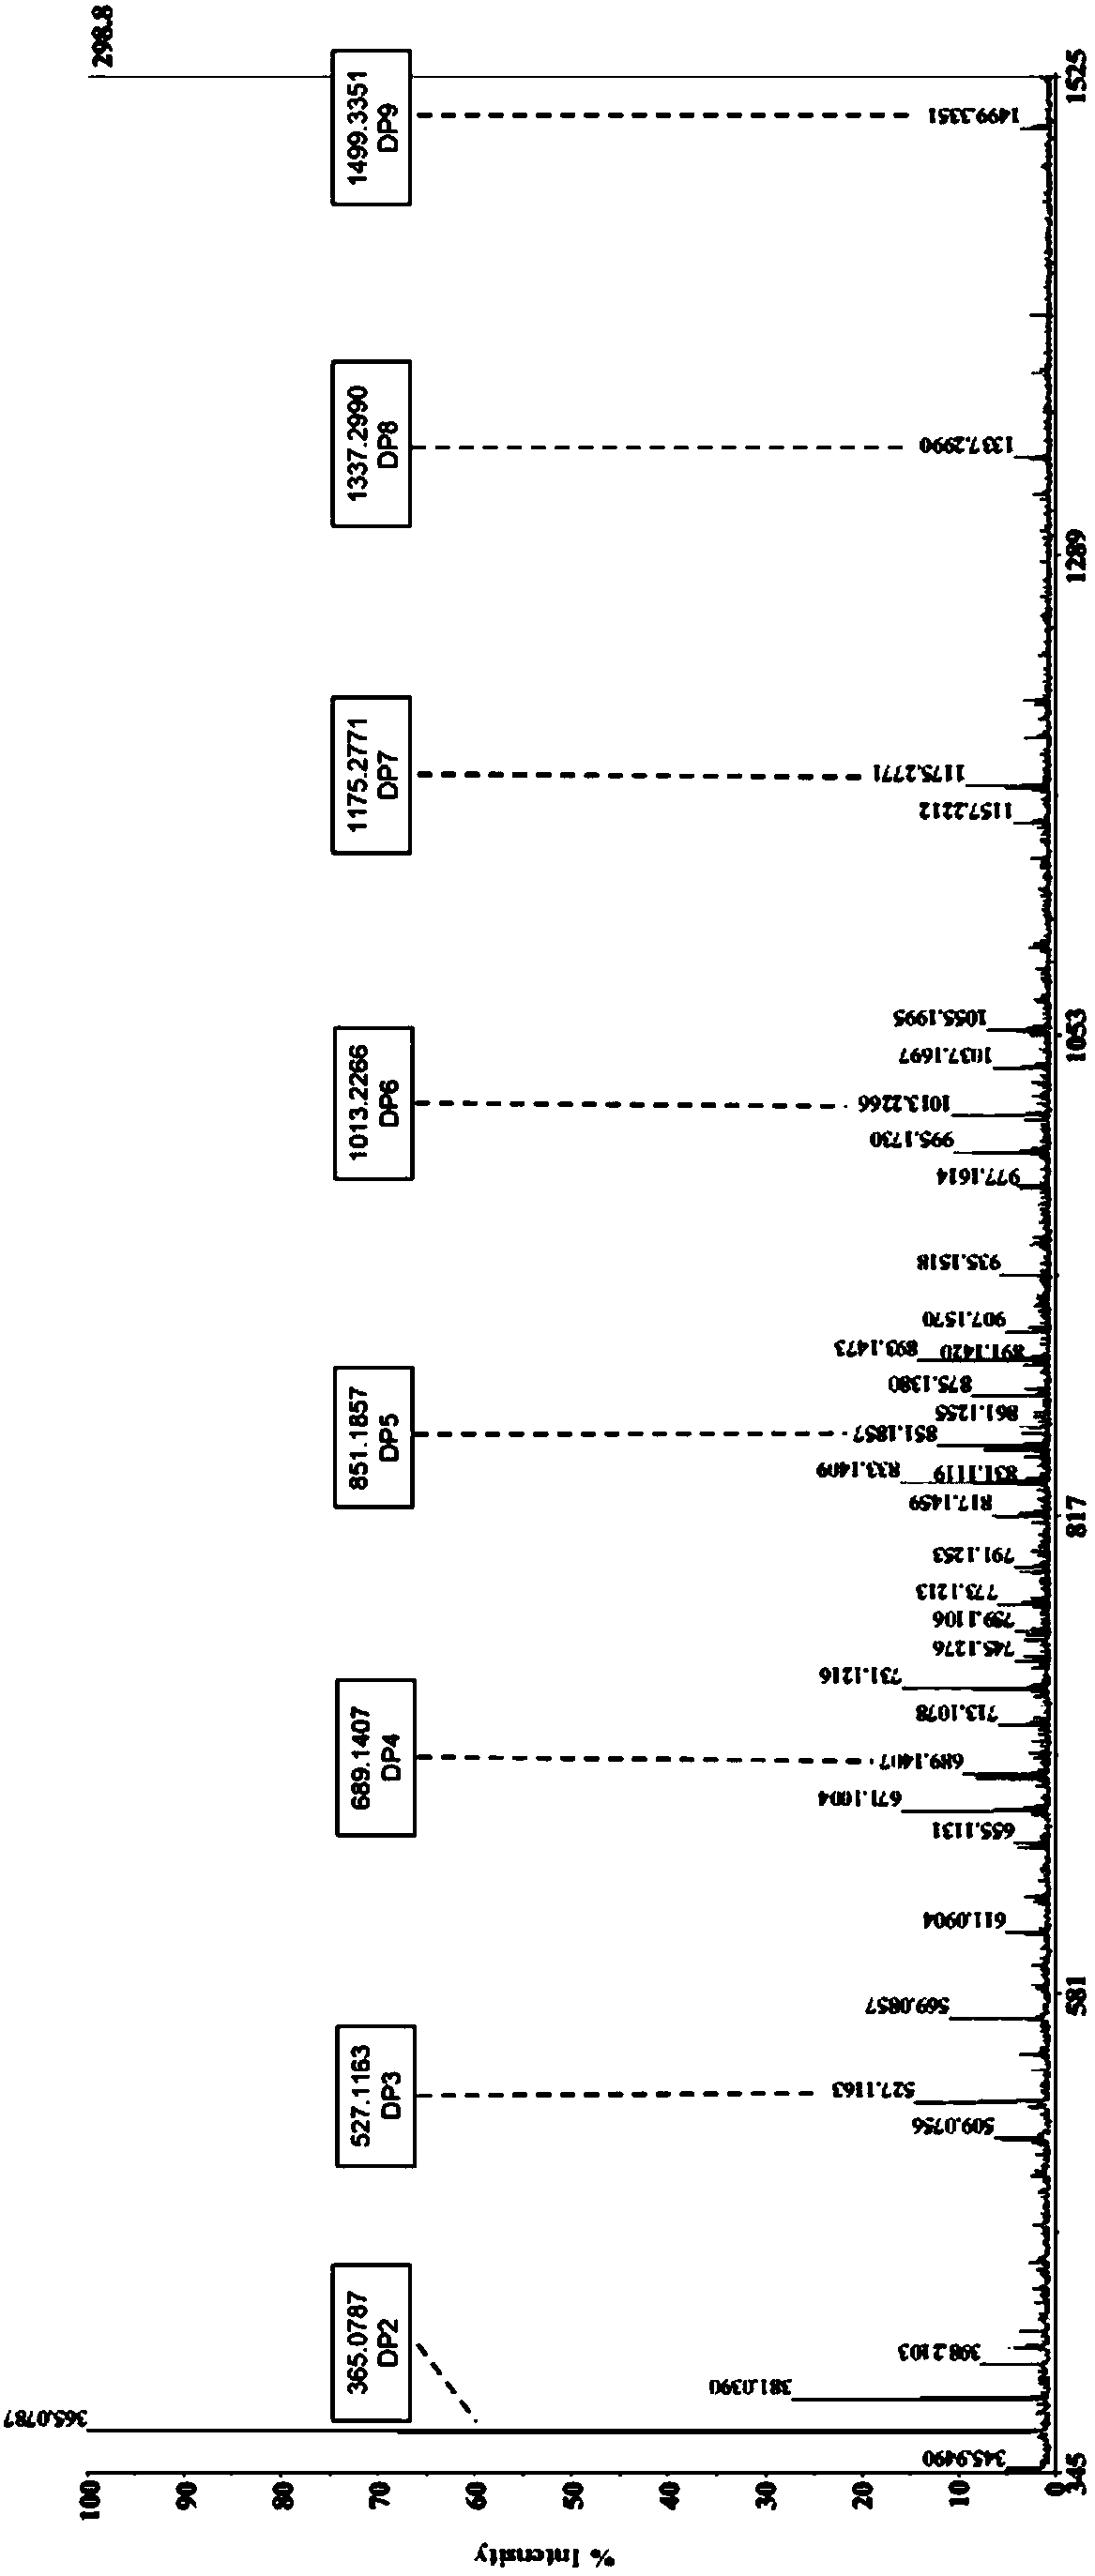 Glucomannanase encoding gene and enzyme, preparation and application thereof